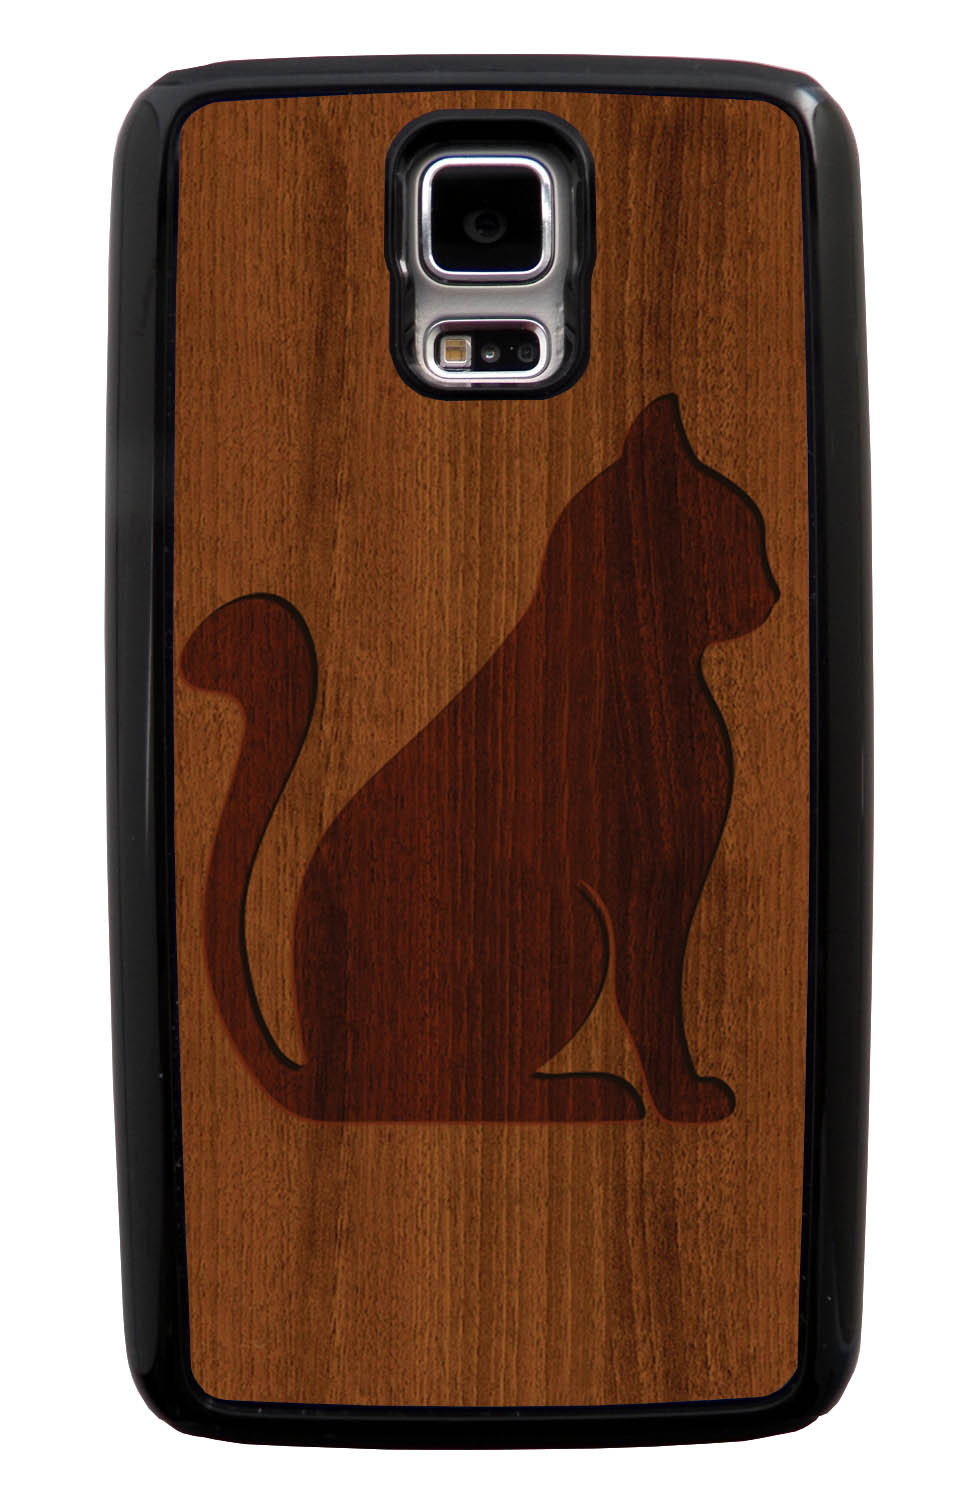 Samsung Galaxy S5 / SV Cat Case - Simulated Cherry Wood Engraving Sitting Cat